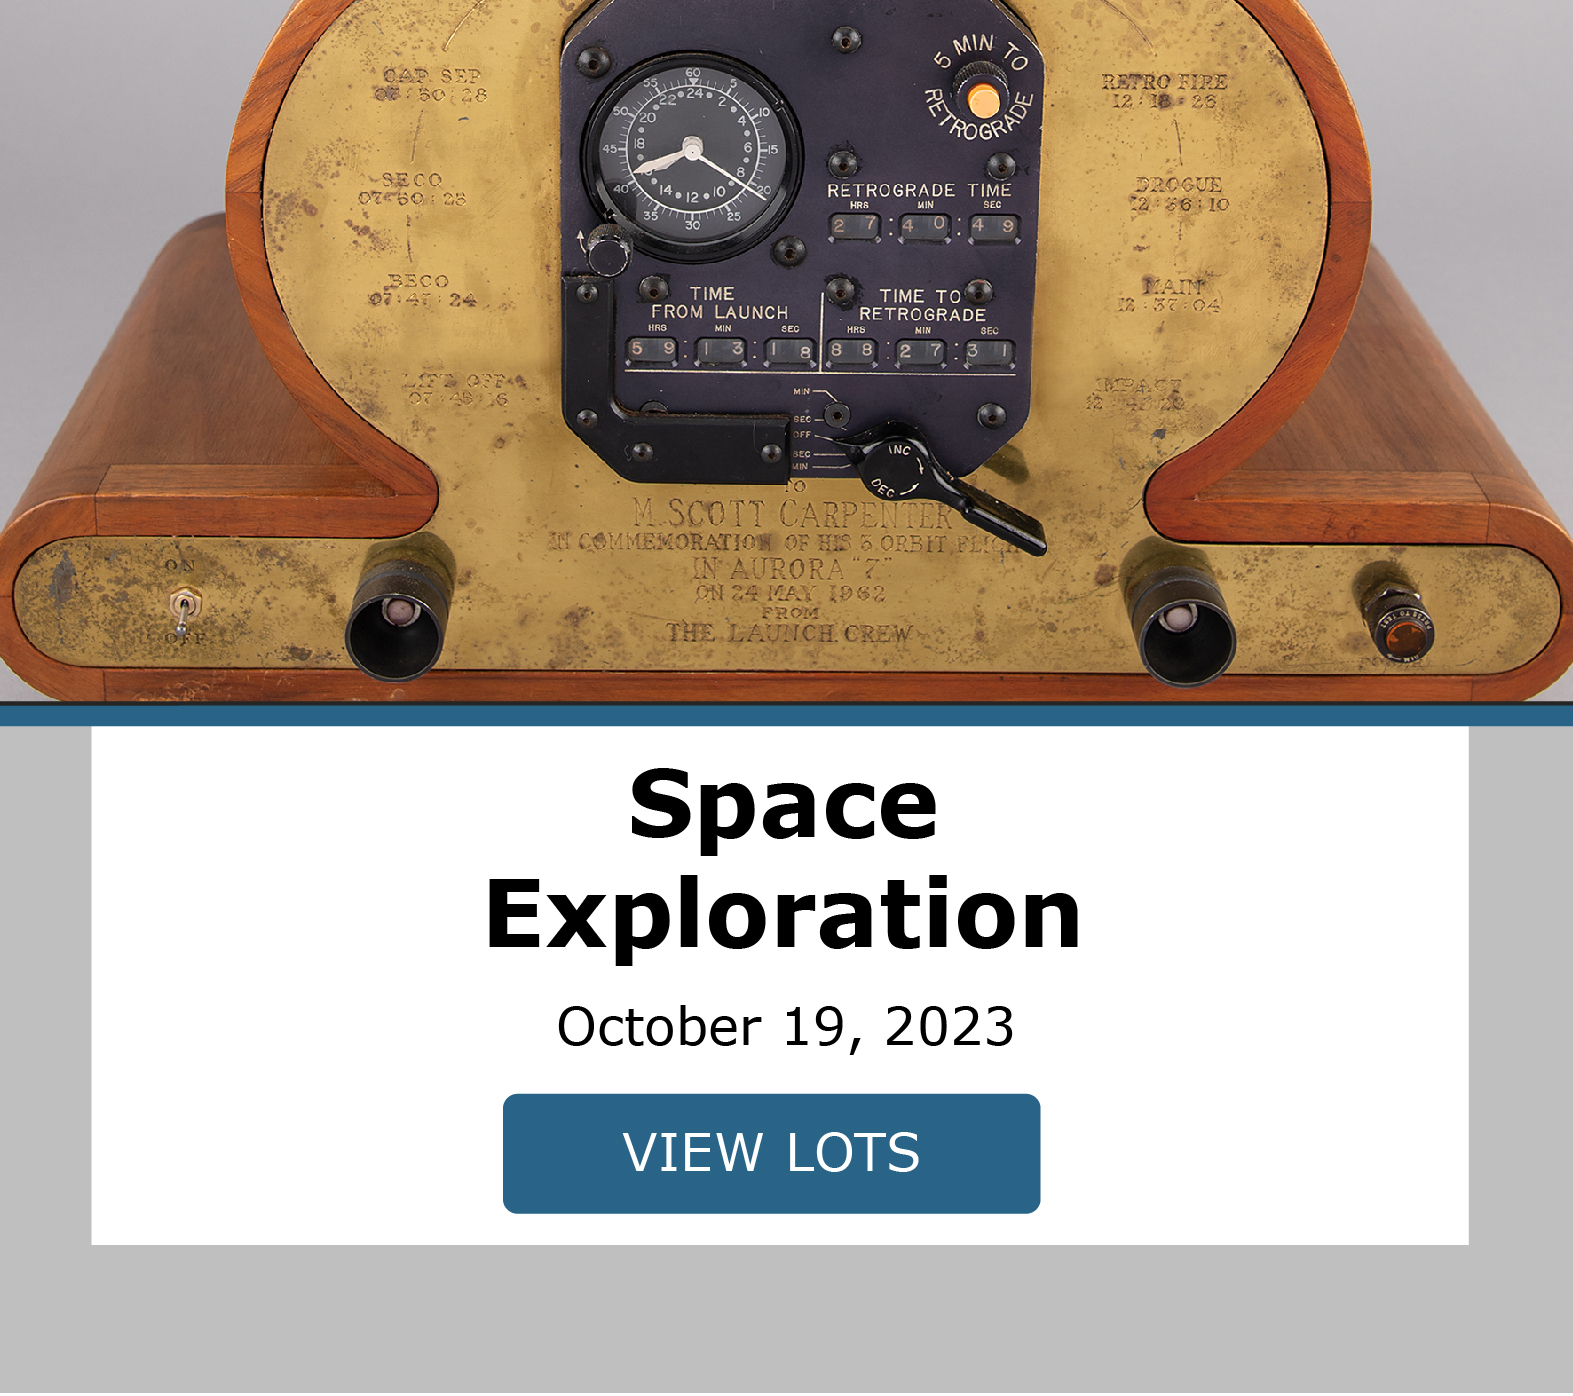 Space Exploration - Auction closes October 19th - Bid now!